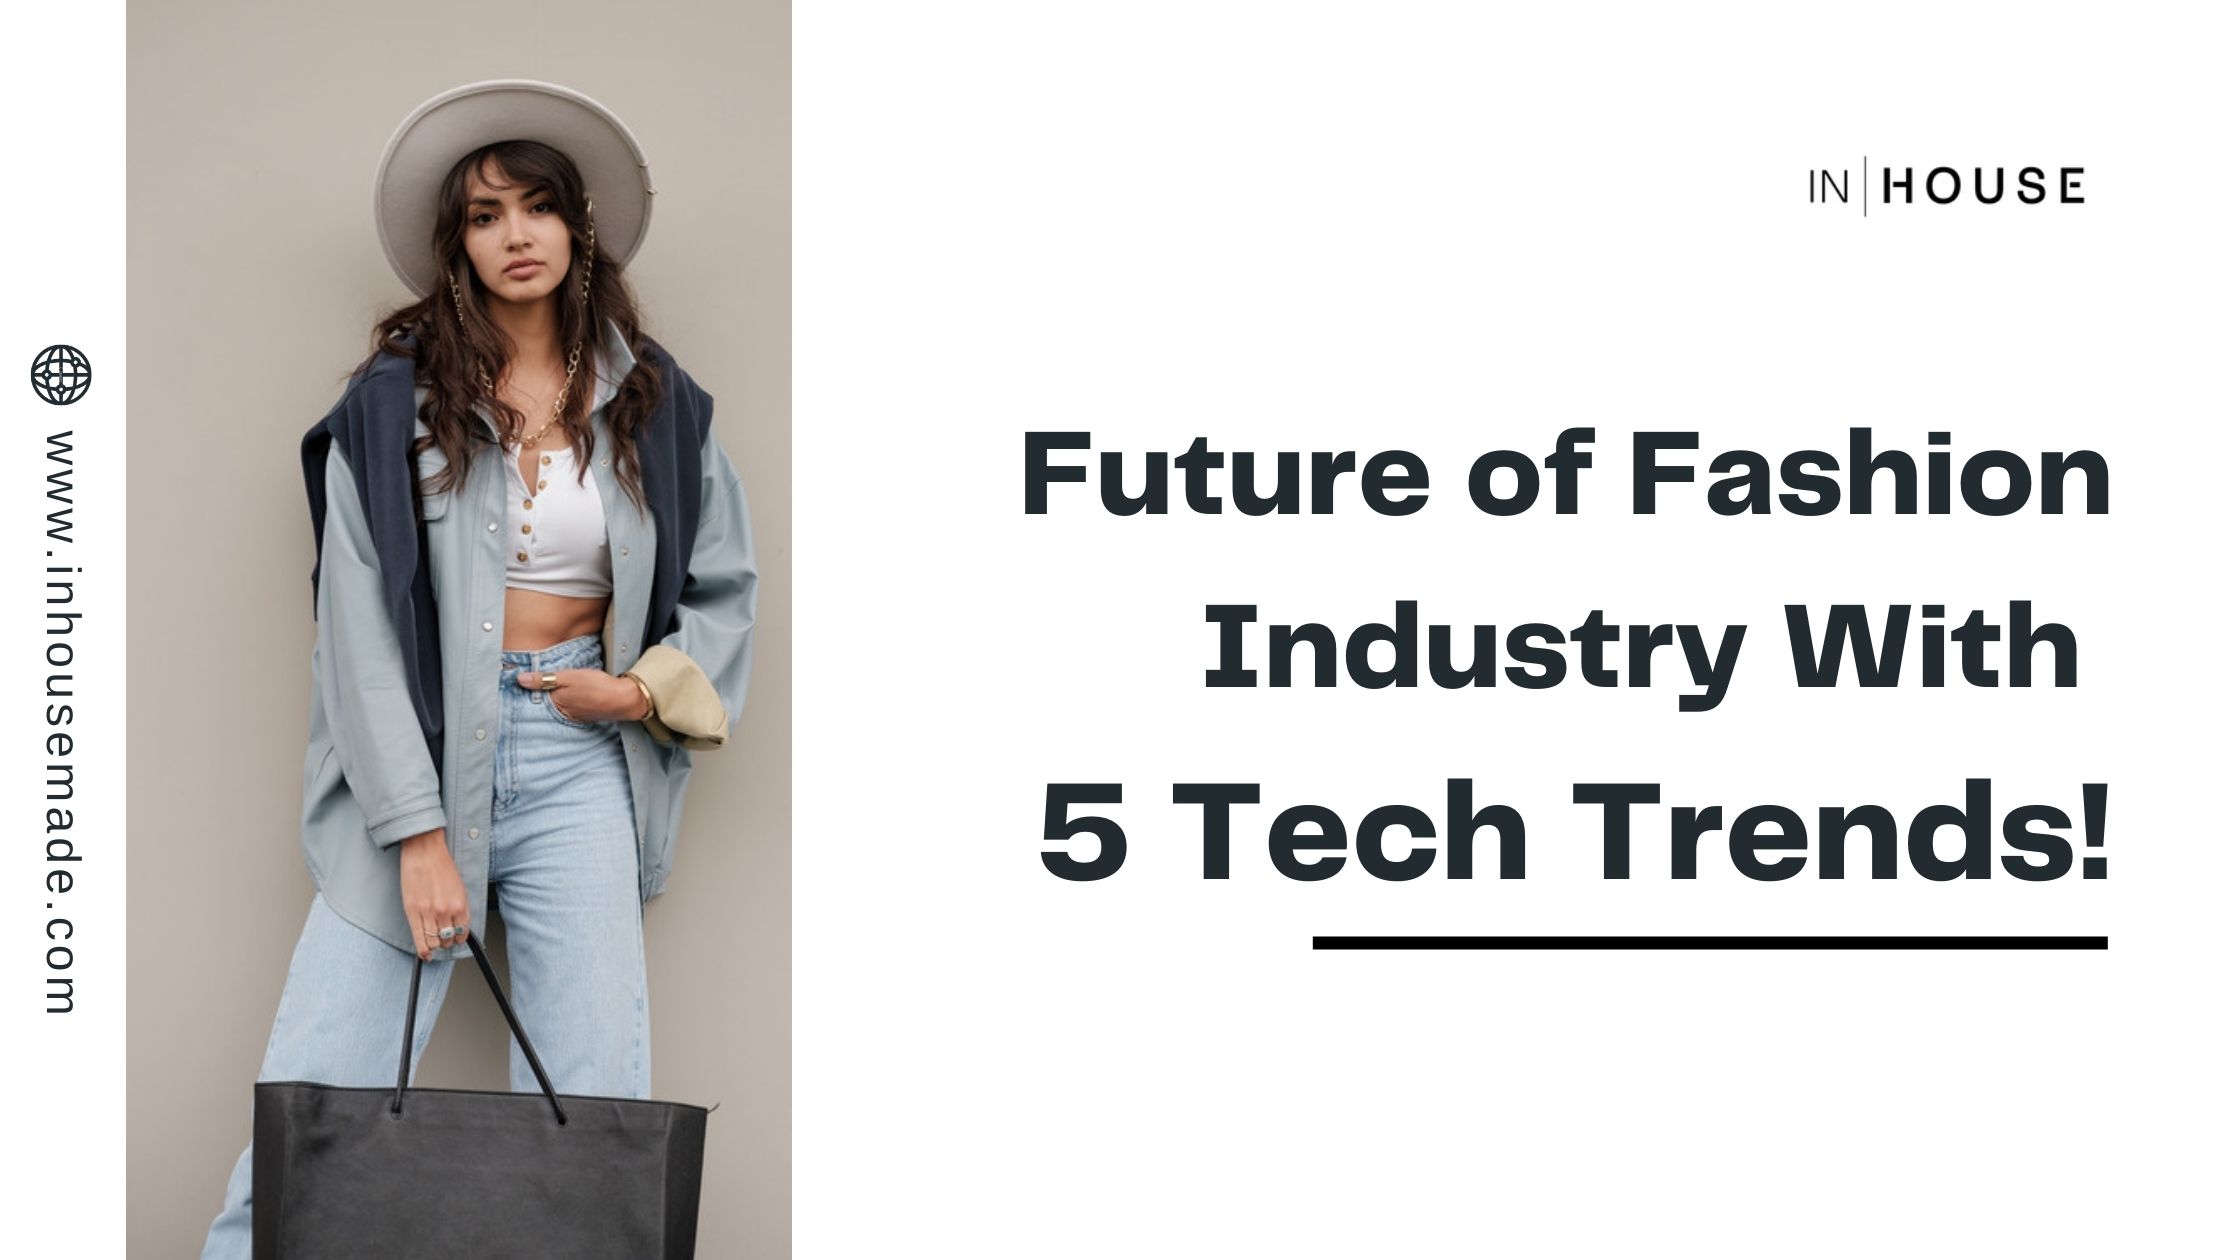 Shaping the Future of Fashion Industry With 5 Tech Trends!